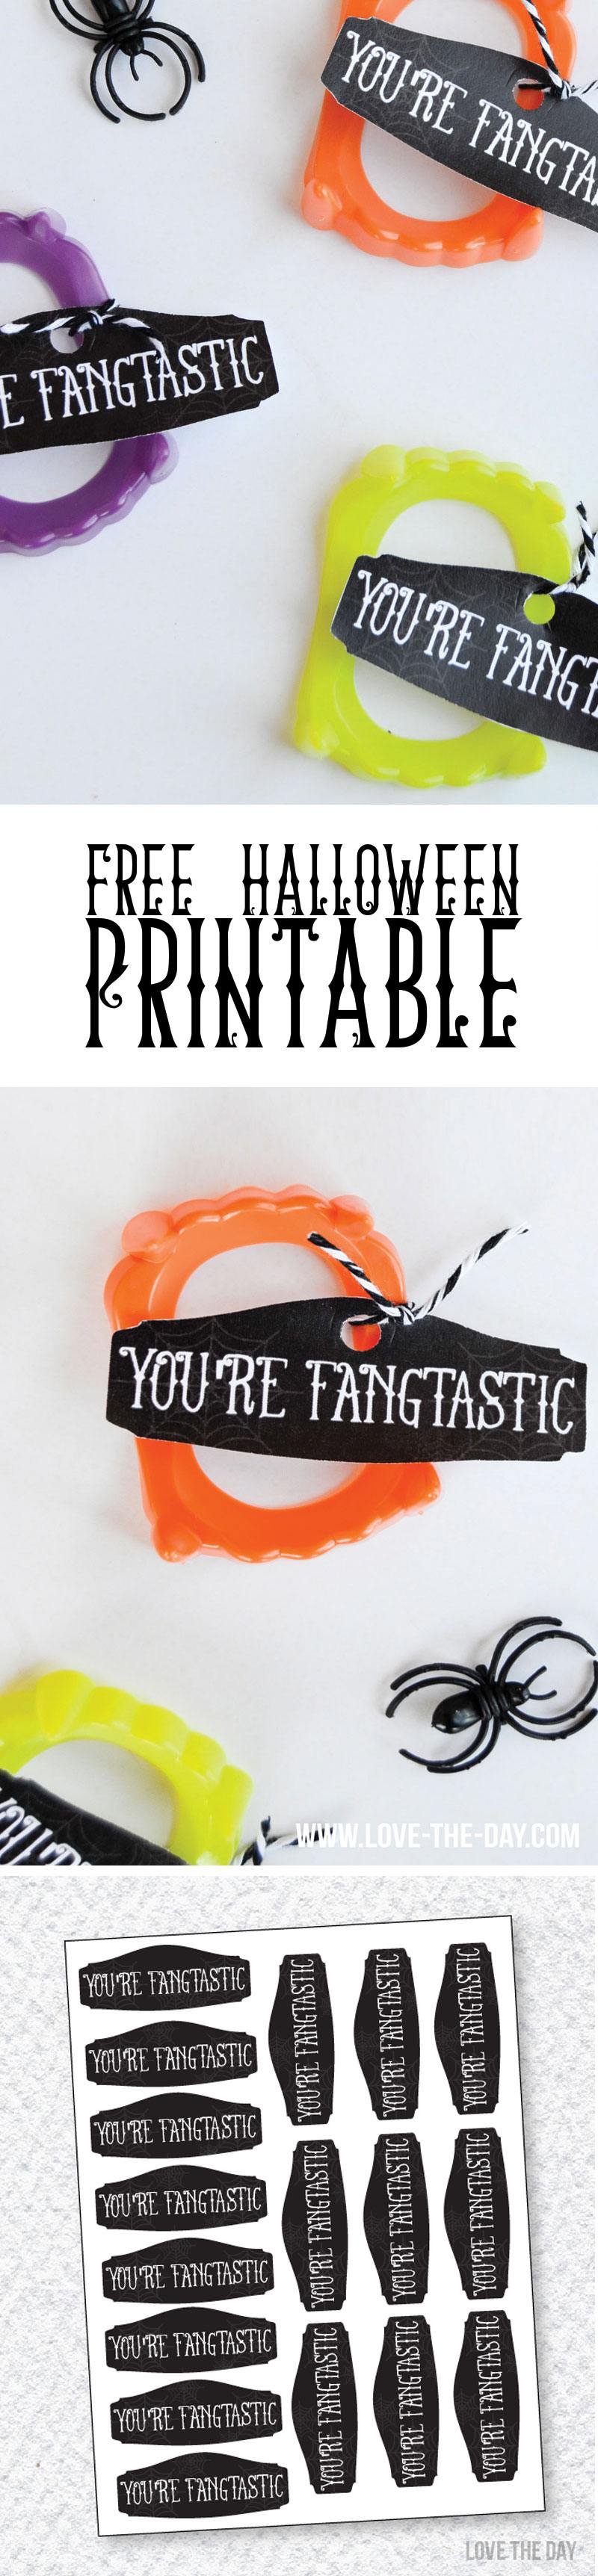 FANGTASTIC HALLOWEEN IDEA & FREE PRINTABLE by Lindi Haws of Love The Day